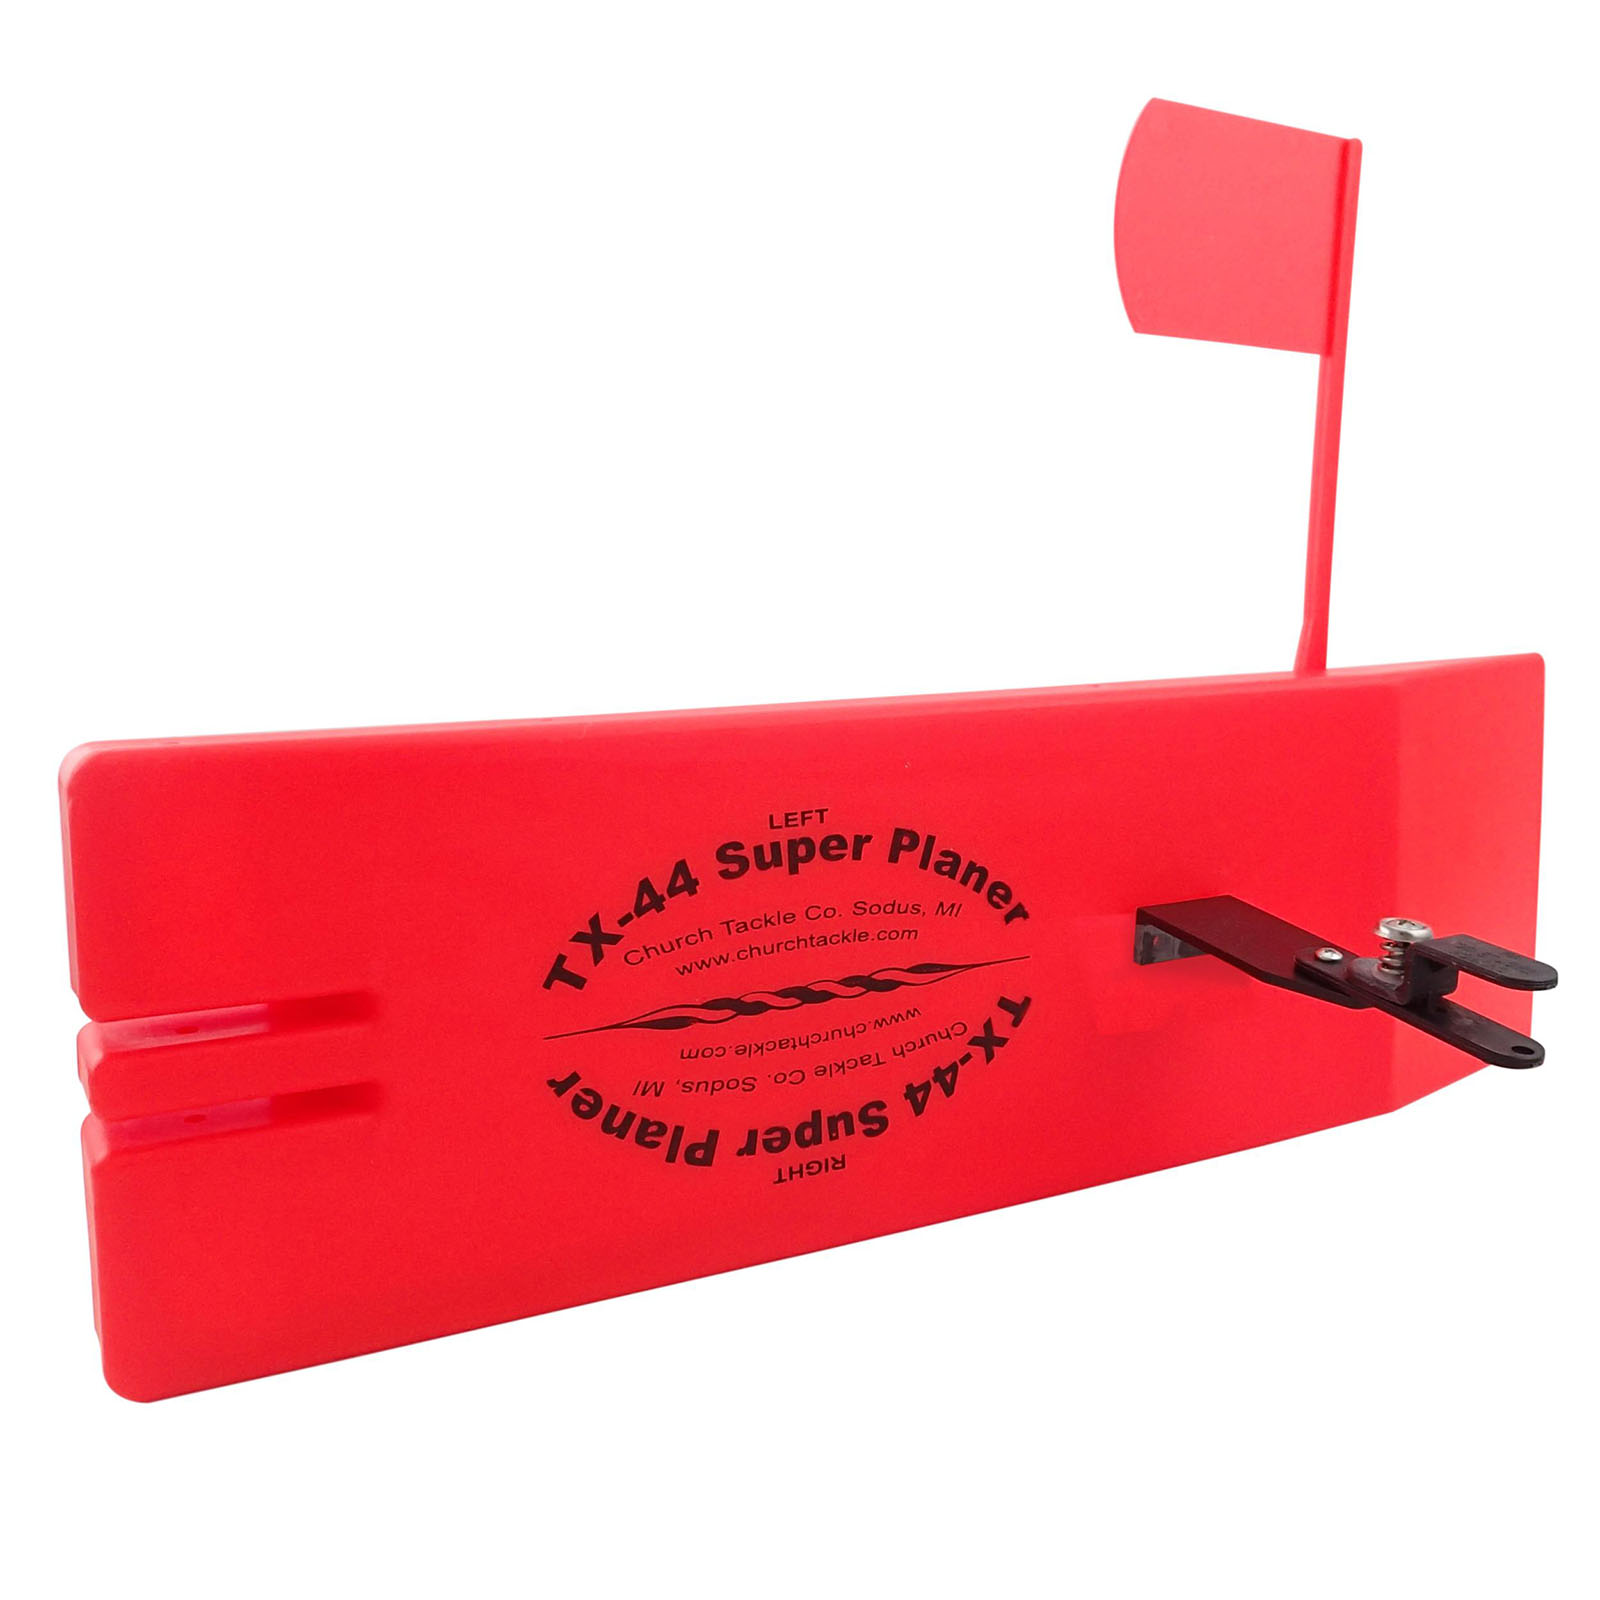 Planer Board - Includes (1) 10 - For Starboard (Right) Side fishing